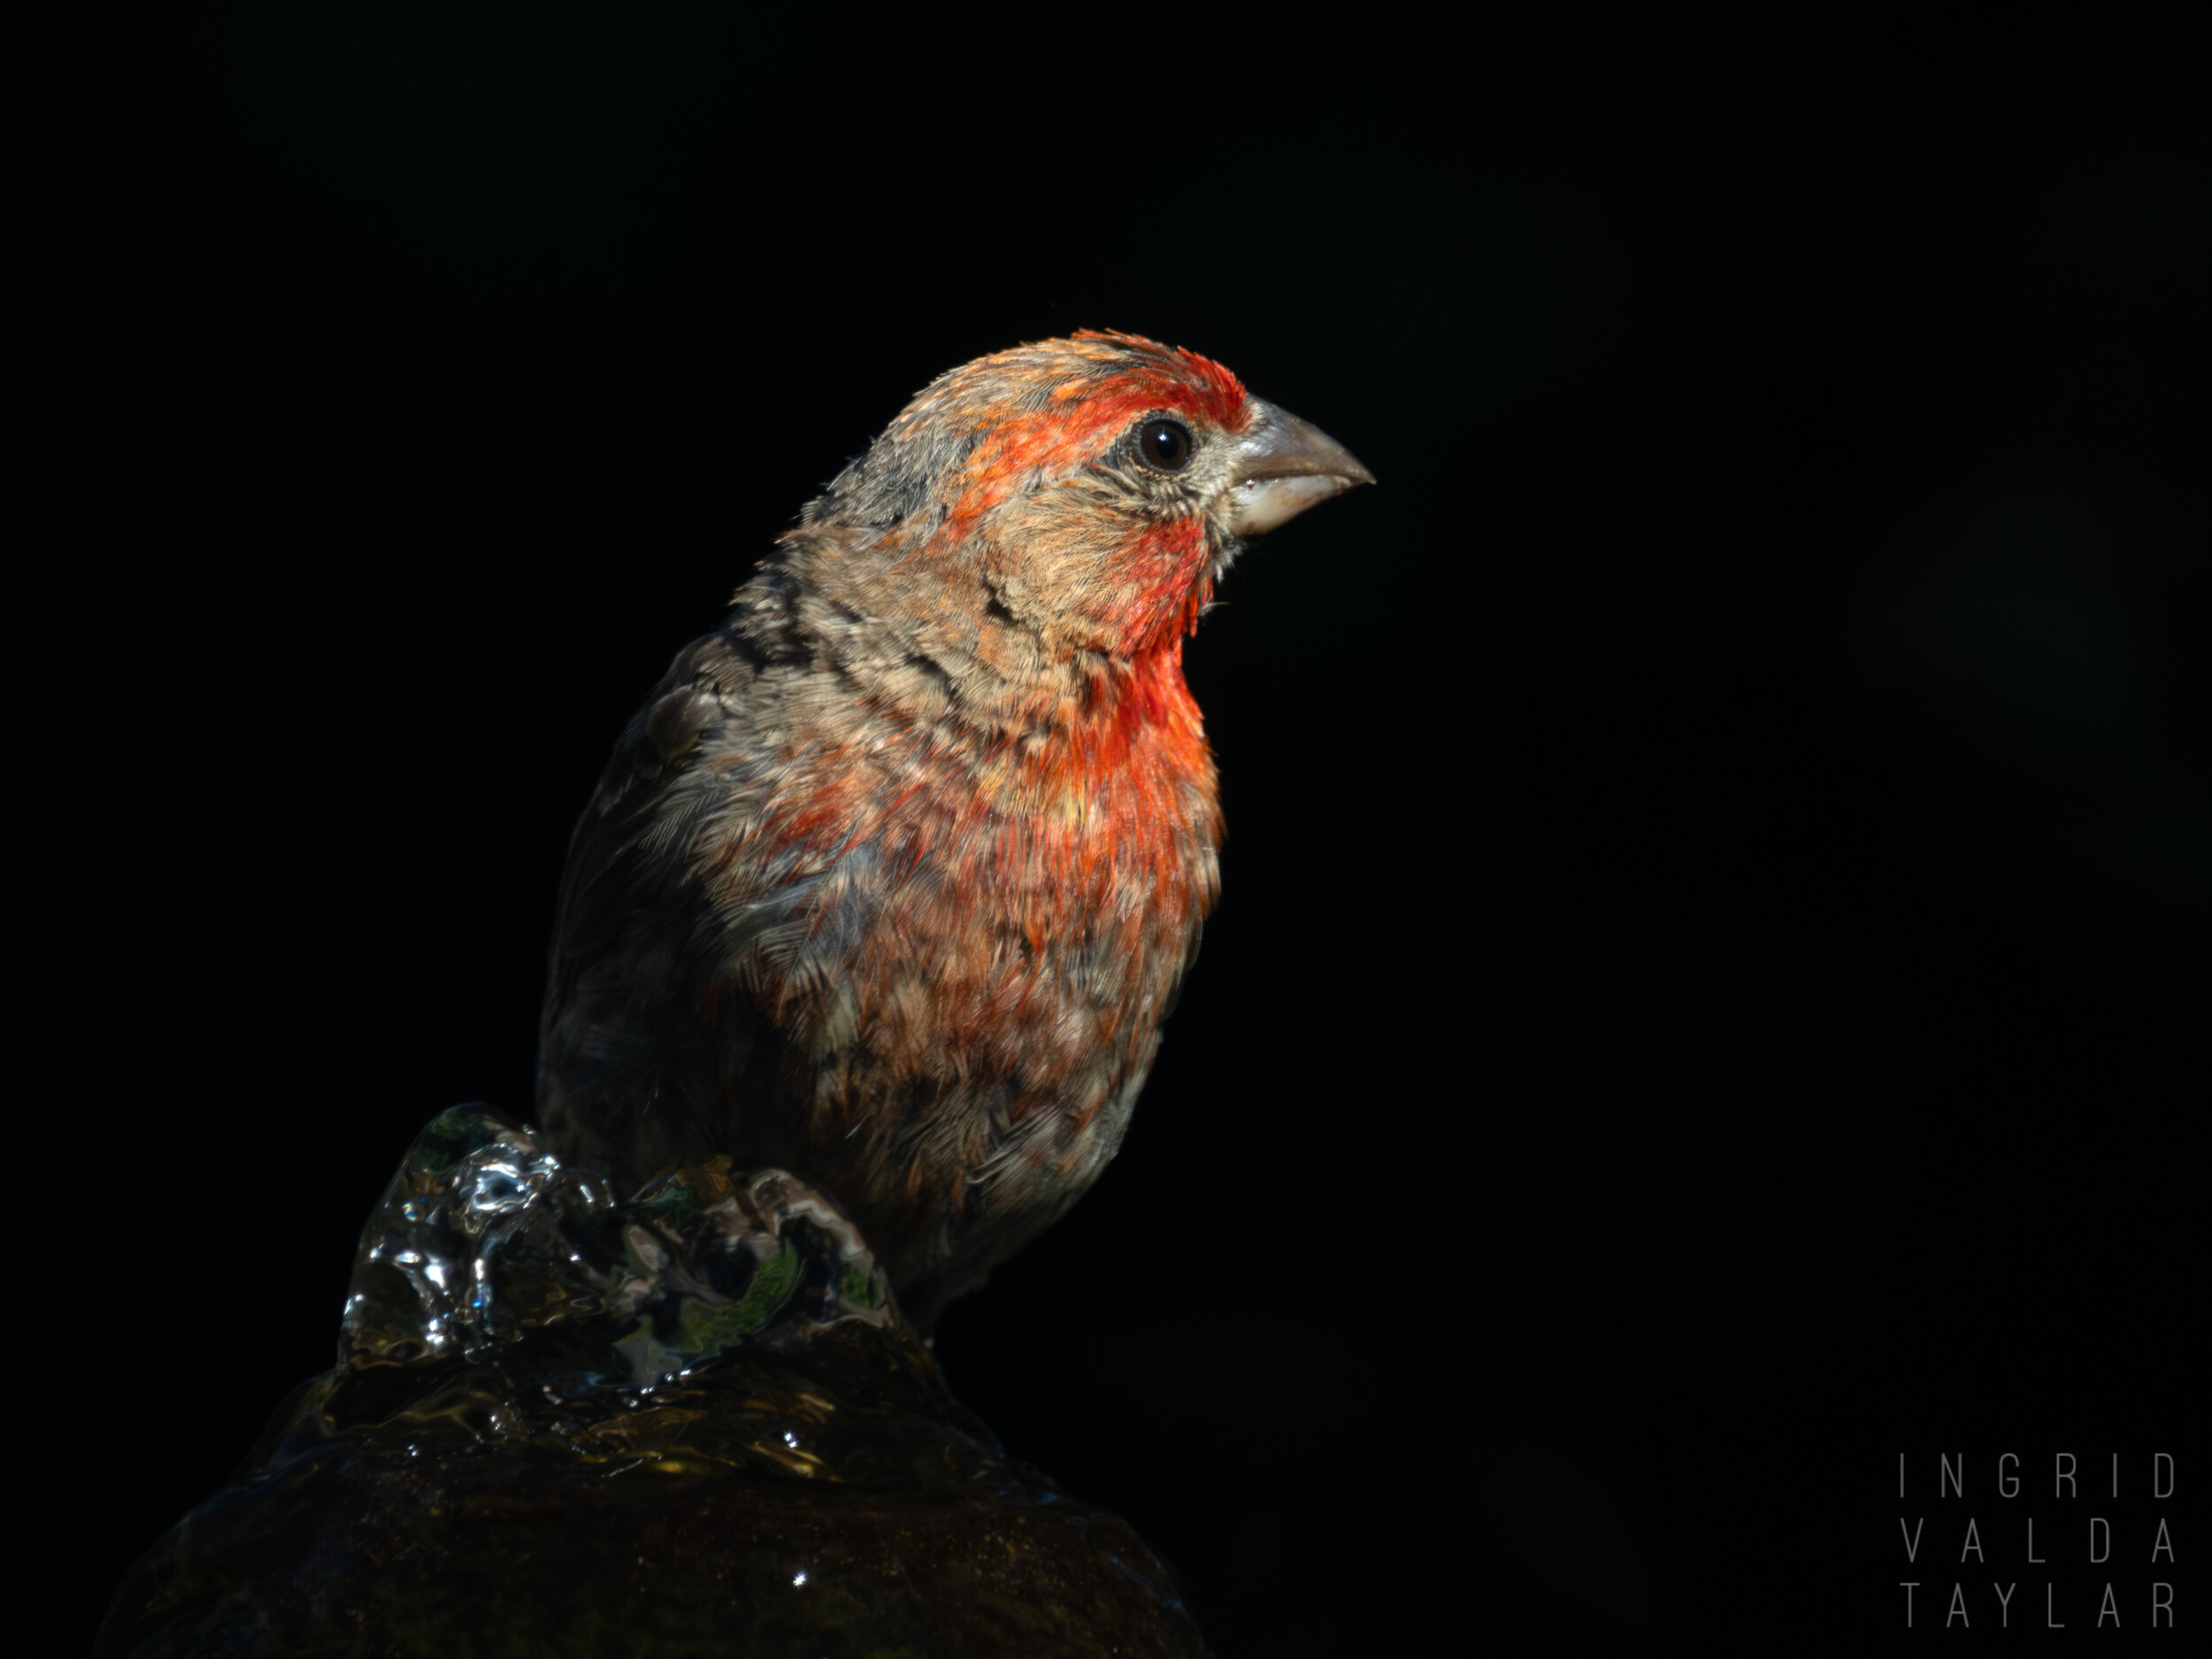 Male House Finch on Black Background